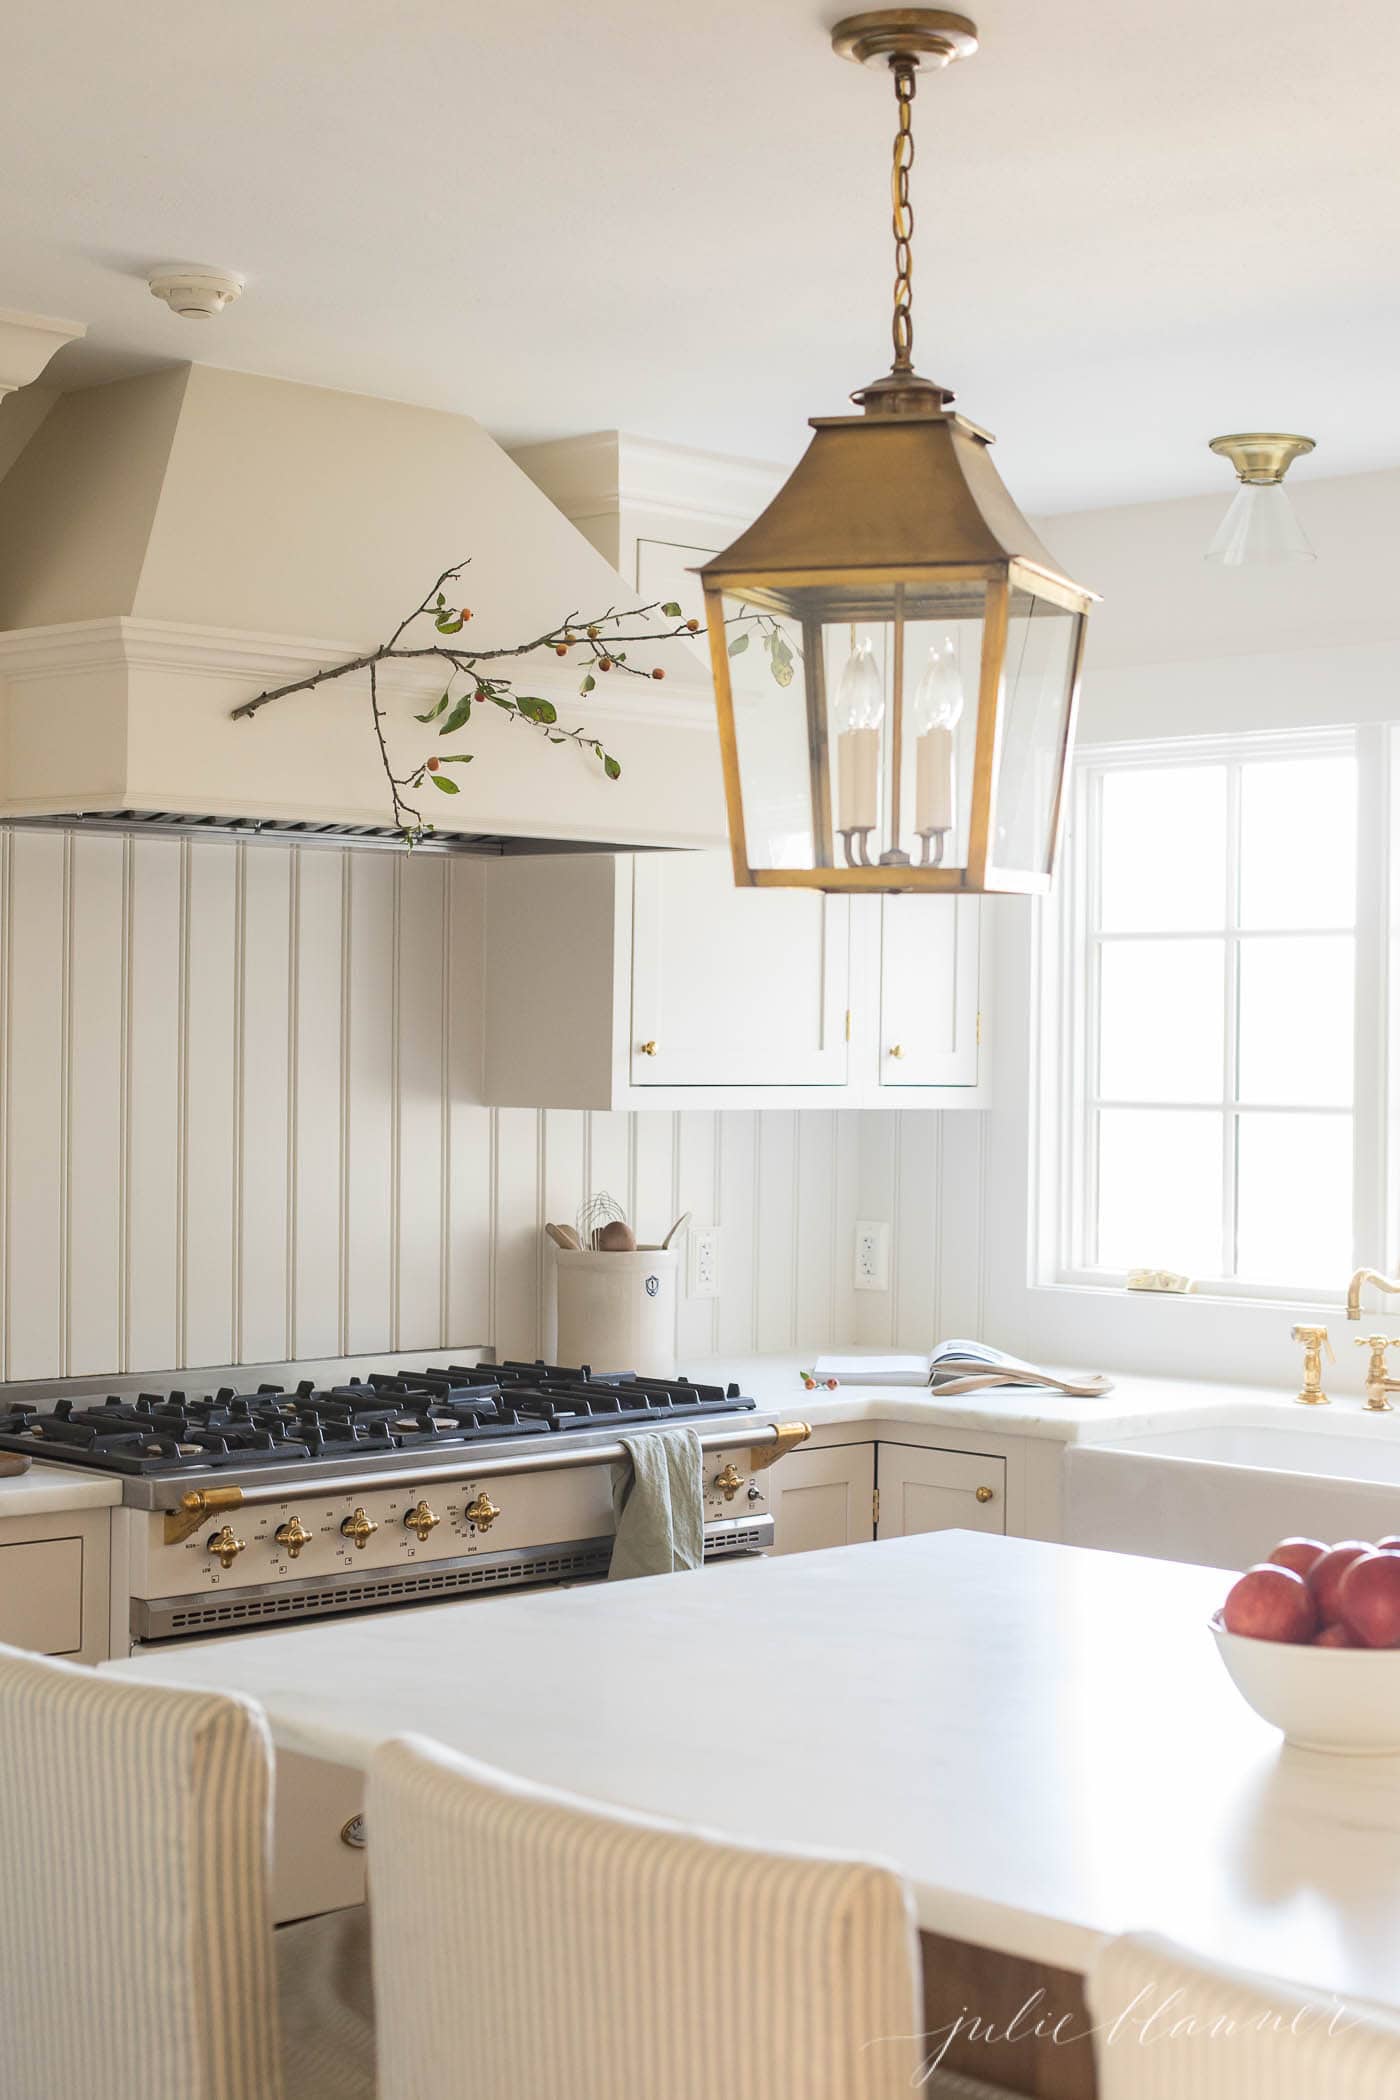 How to decorate with branches and twigs in the kitchen